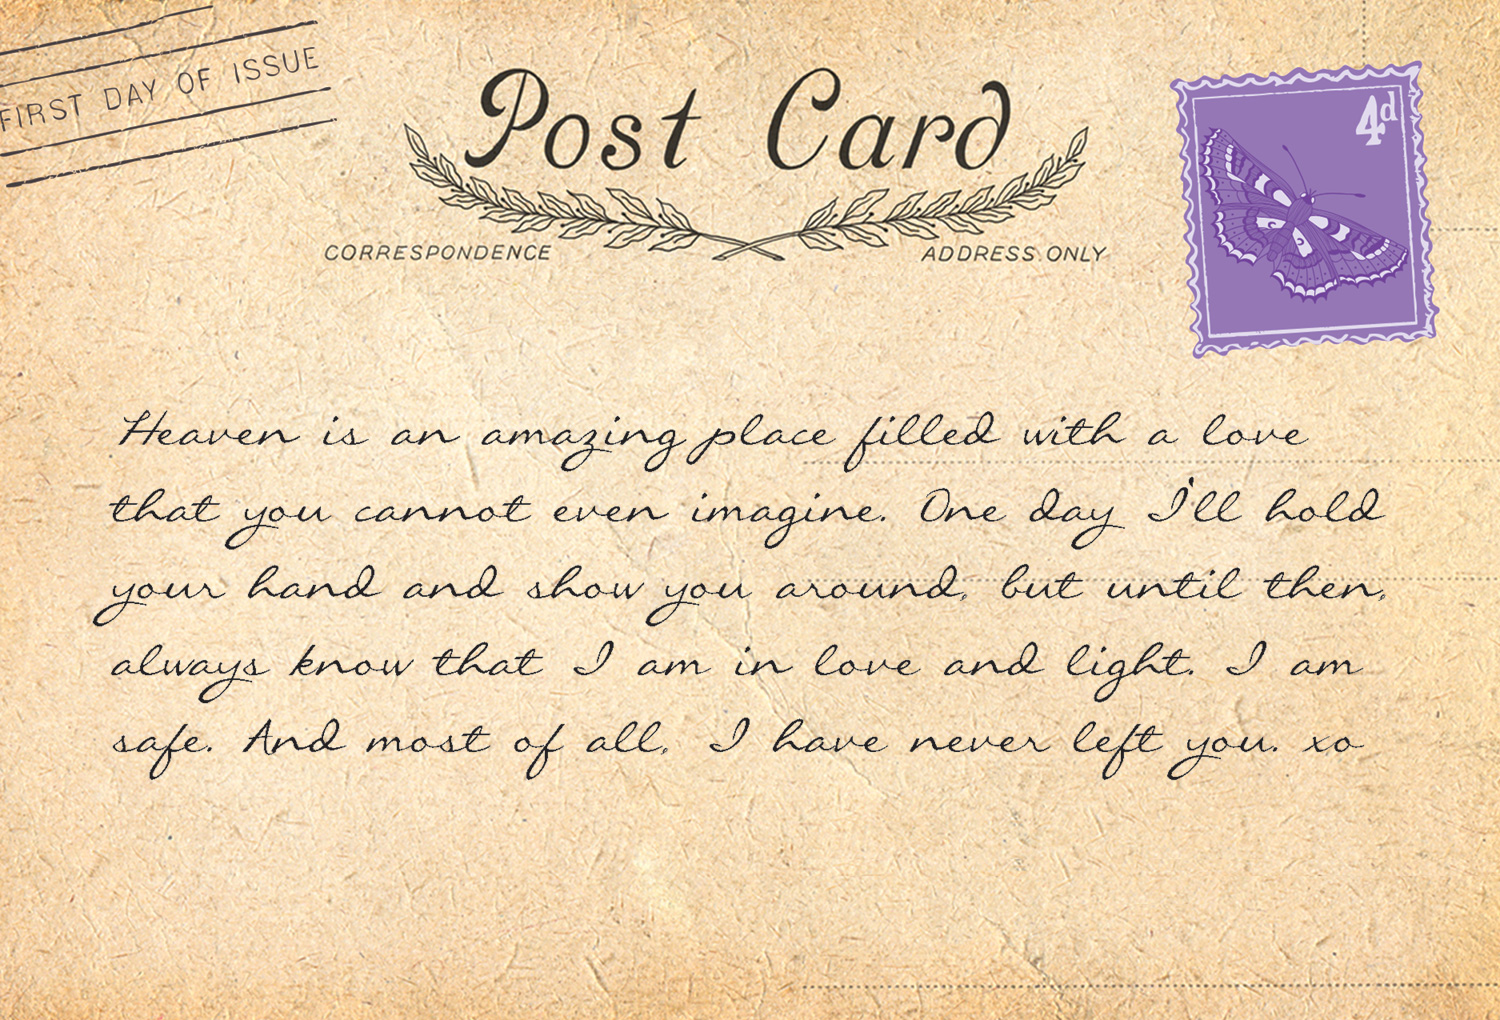 POSTCARDS FROM HEAVEN 2 - back 11